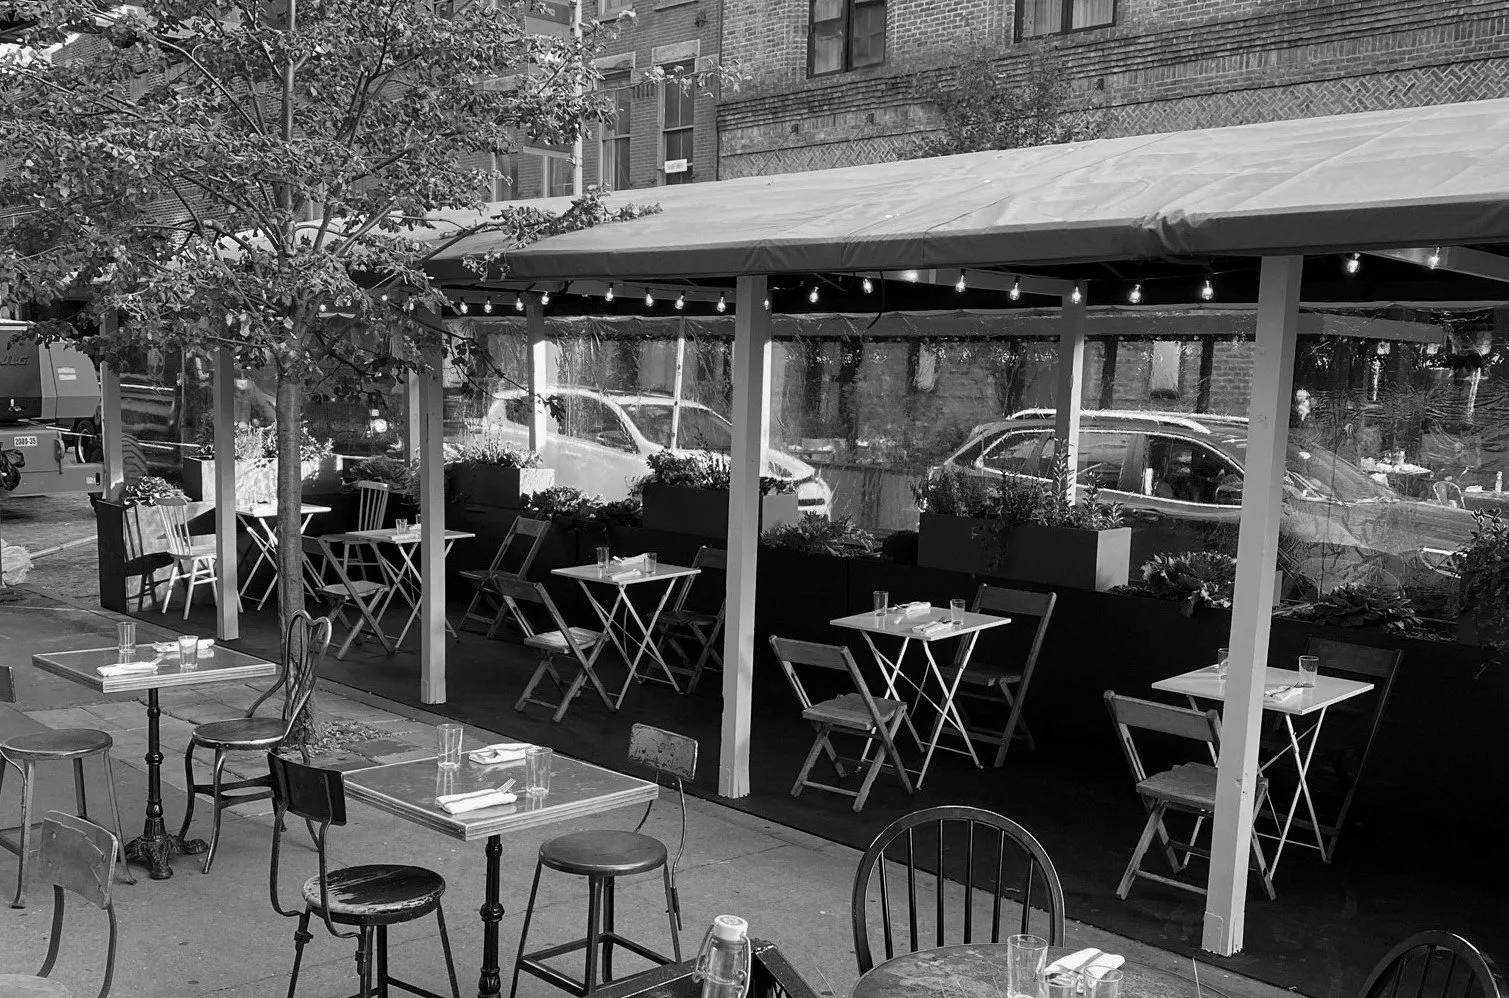 Black and white photo of the outdoor dining area of Yves NYC, featuring 8 tables that seat 2 people each, 5 of which are in a sheed on the street